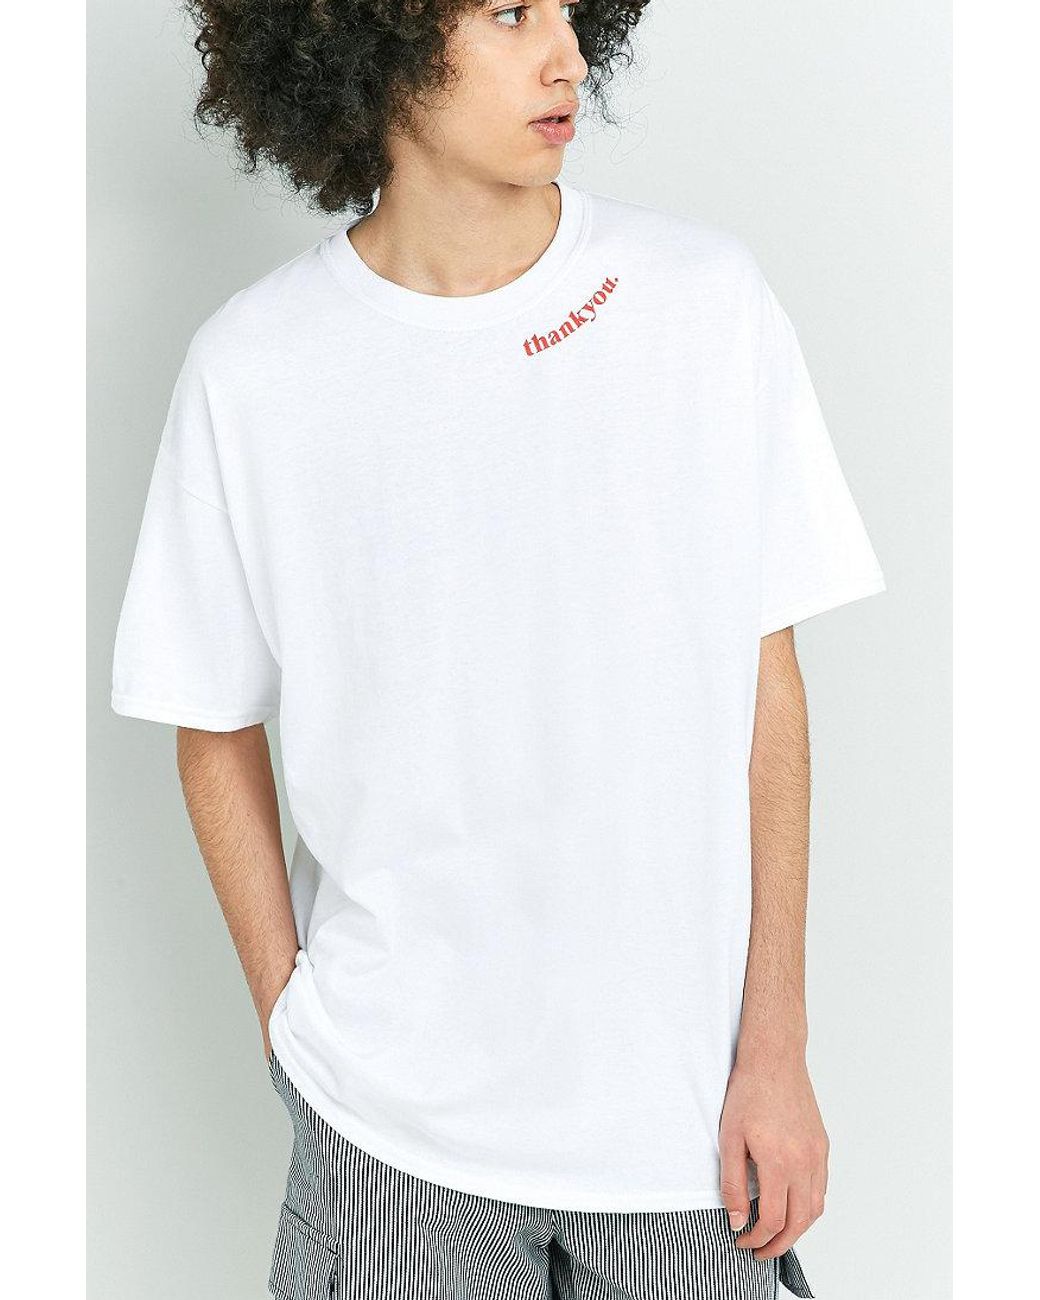 Urban Outfitters Uo Thank Have A Nice Day White T-shirt Men | Lyst UK